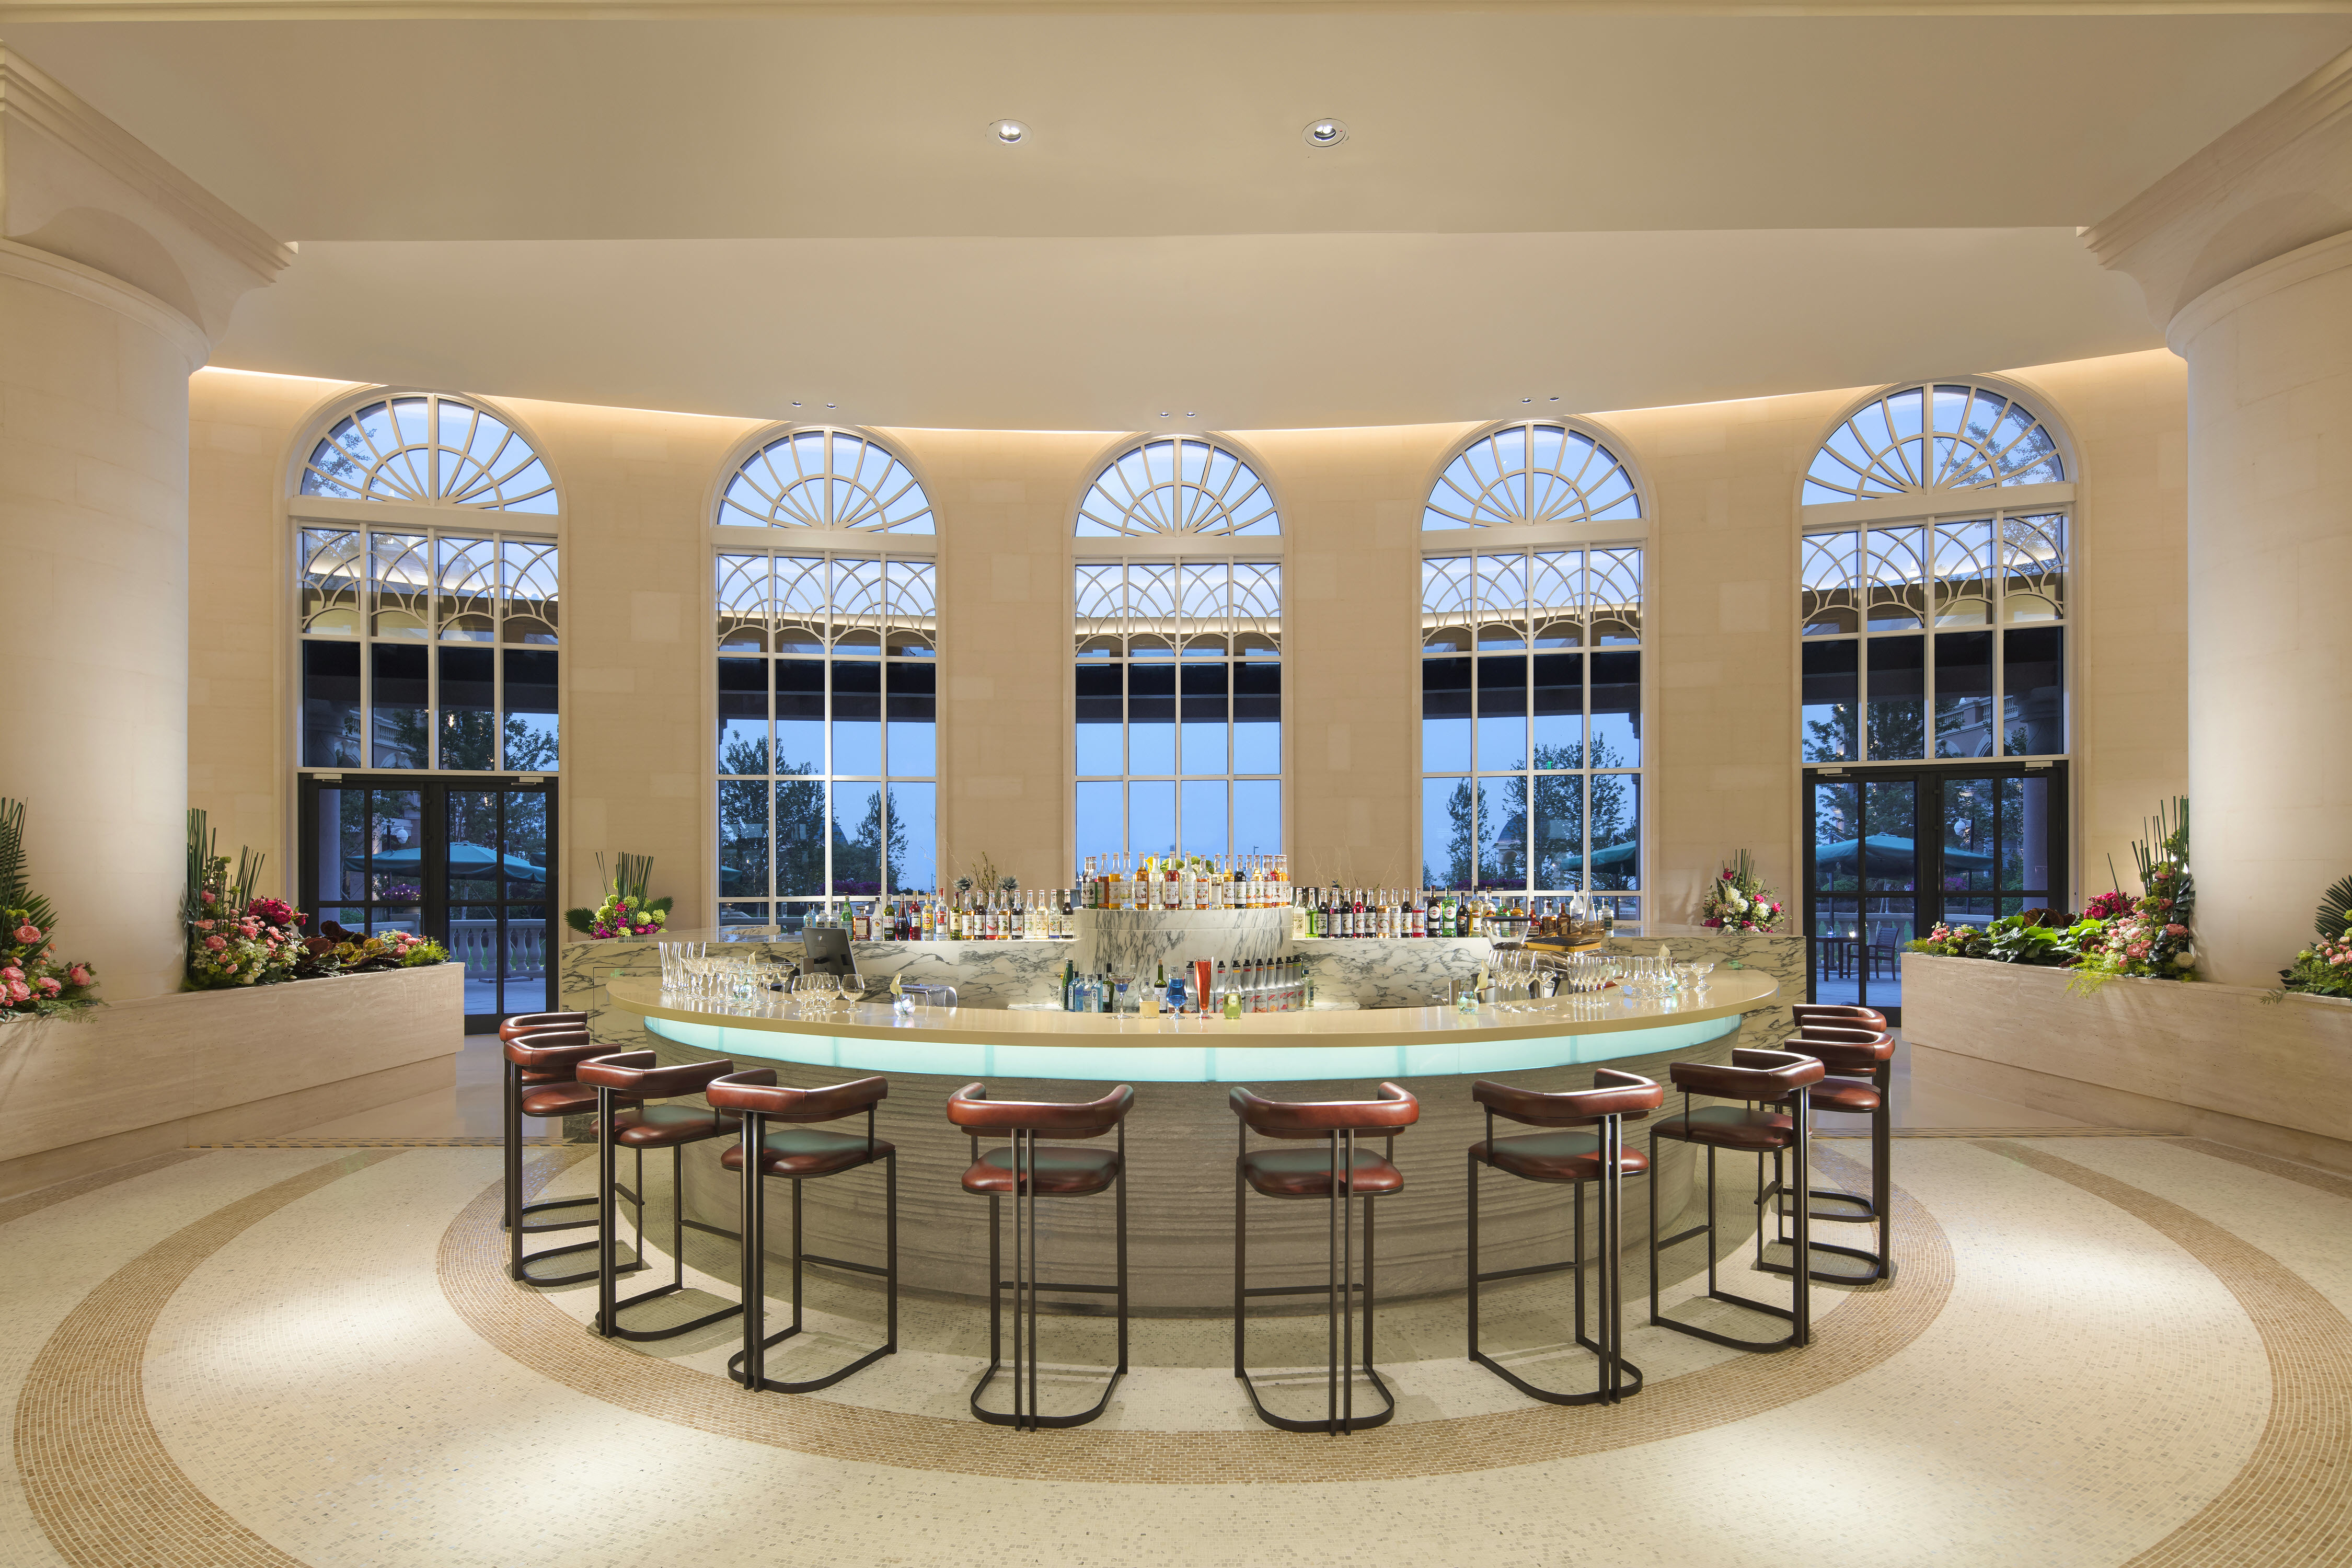 Lobby Lounge Area with Five Arched Domed Windows